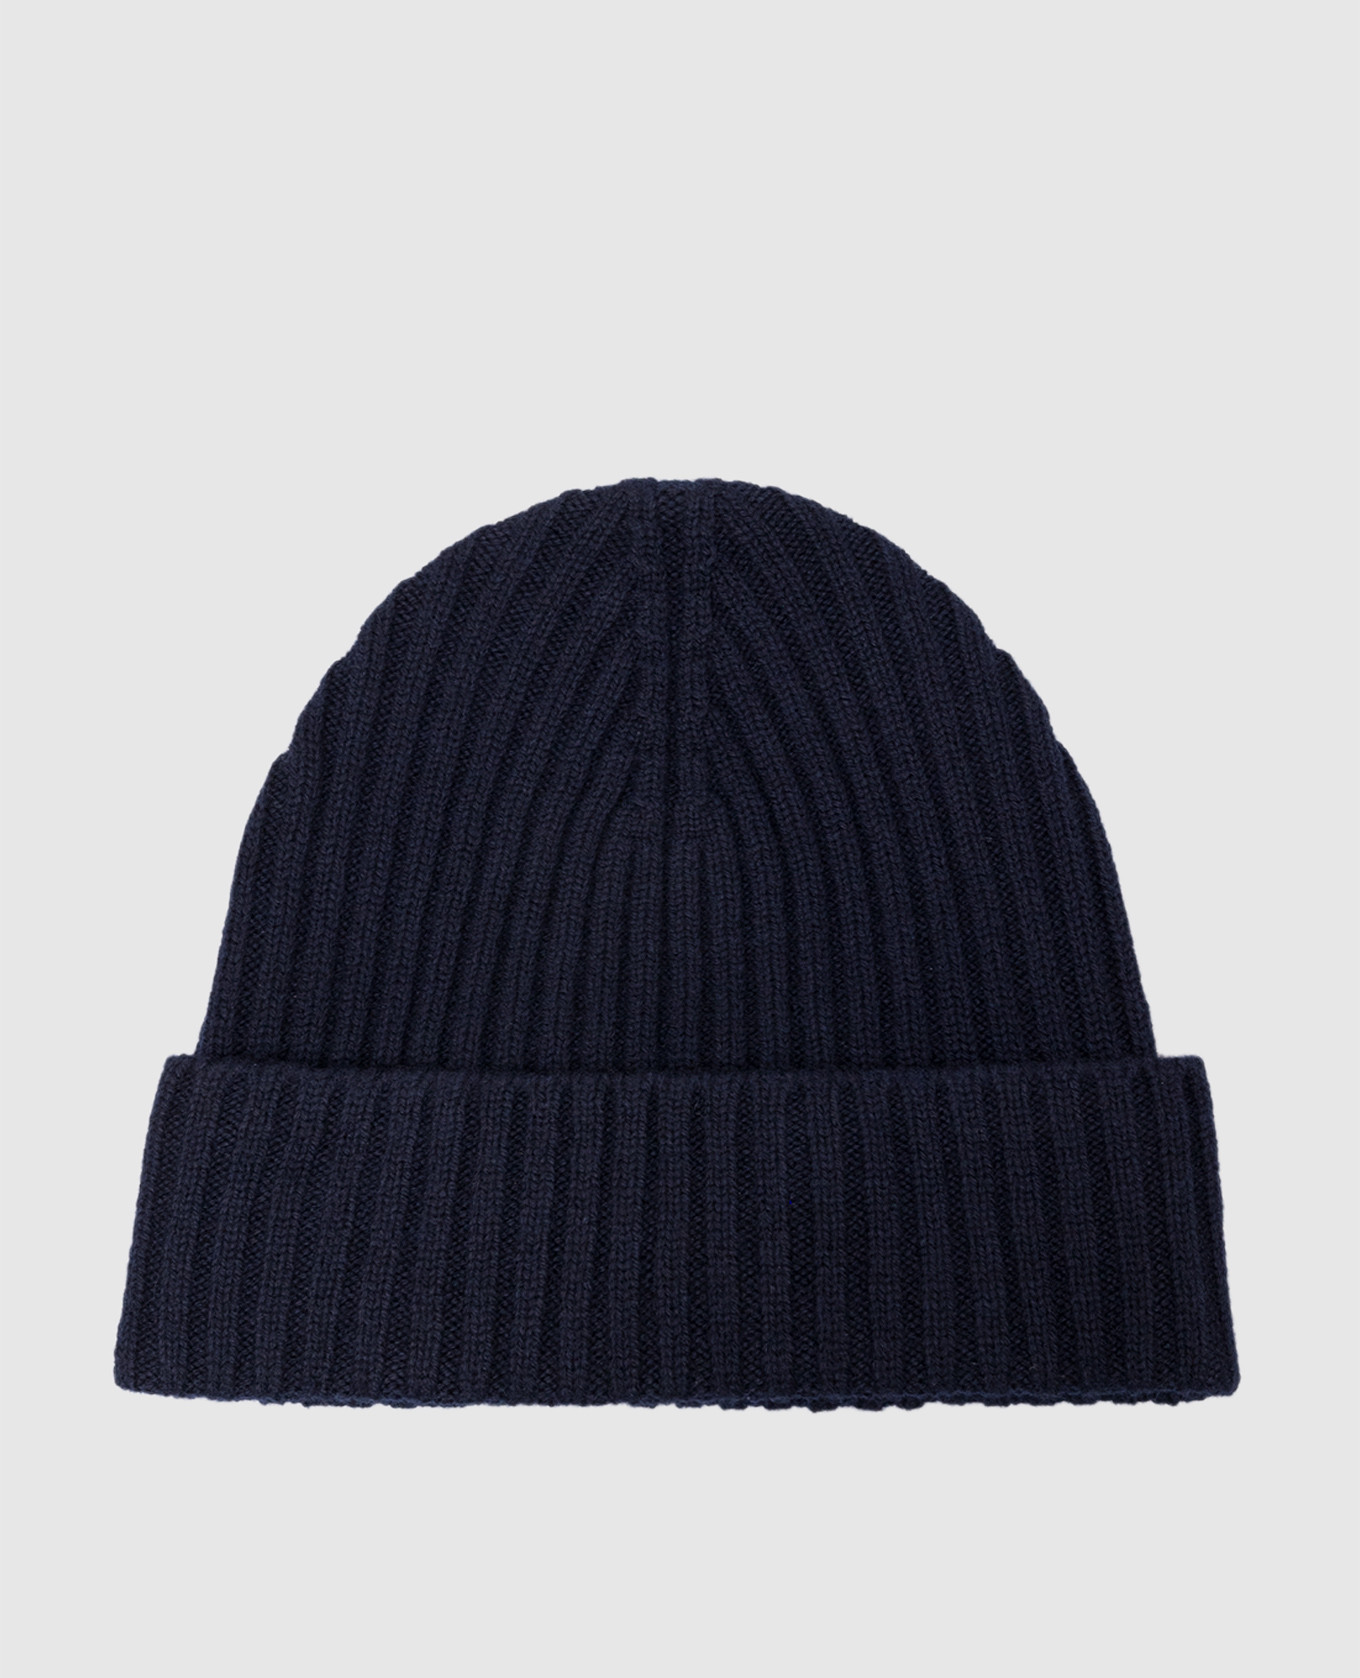 Blue cap made of wool and cashmere